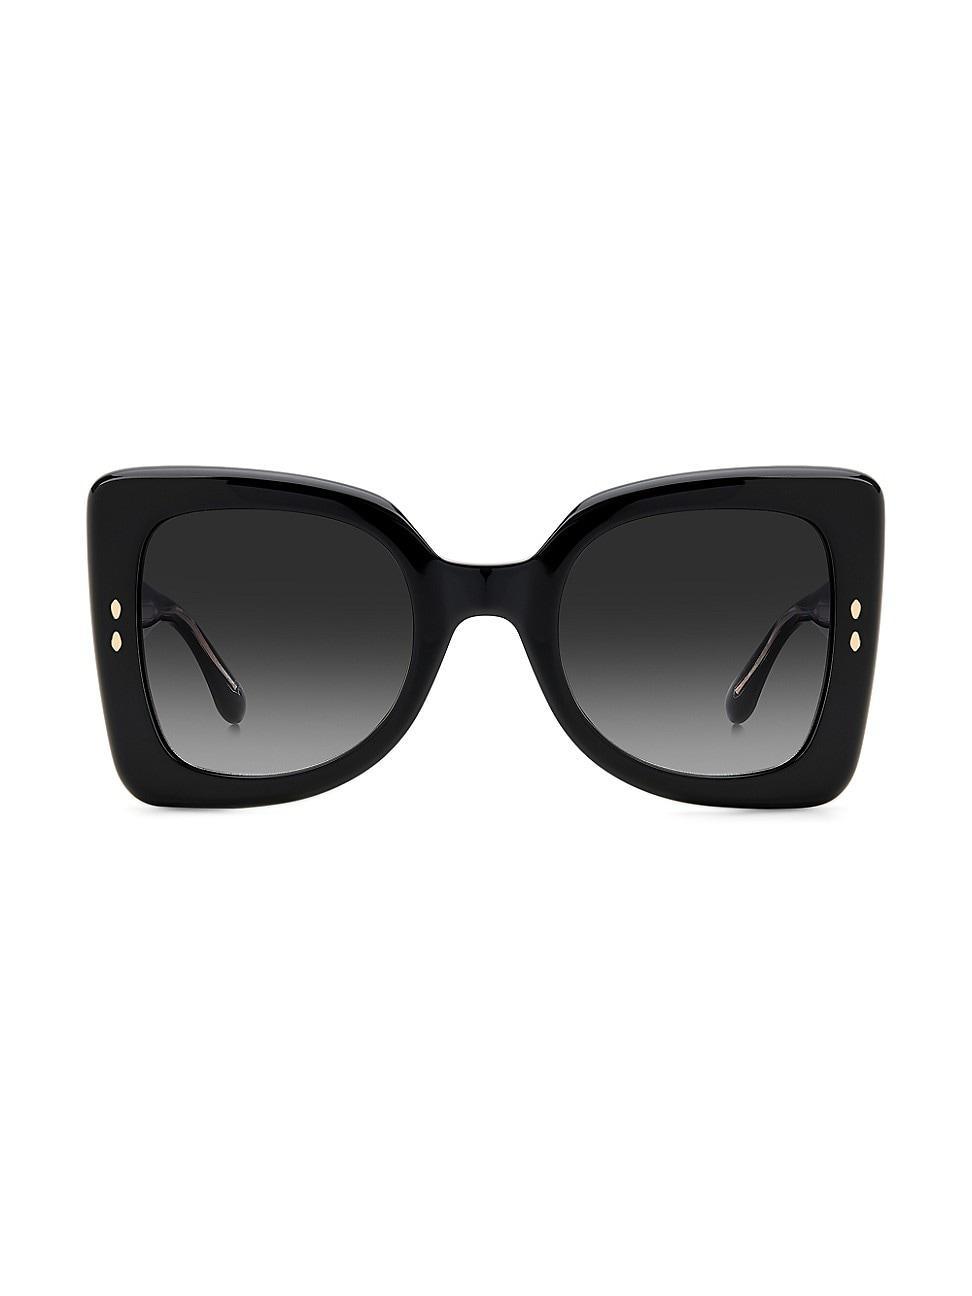 Isabel Marant The New 52mm Gradient Square Sunglasses Product Image